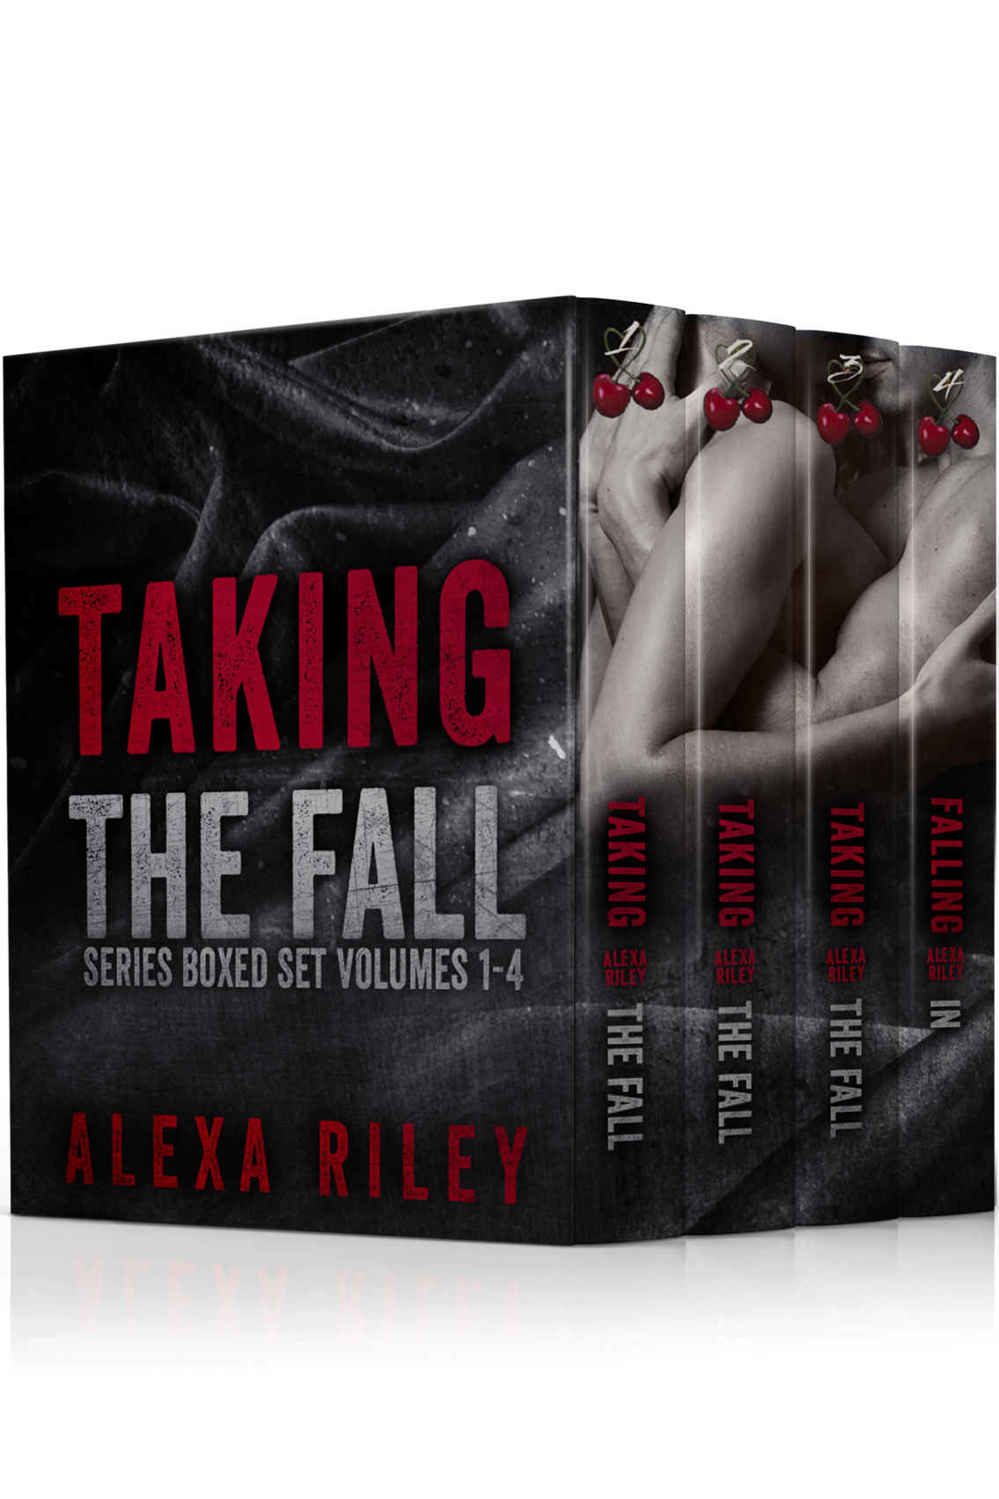 TAKING THE FALL - the Complete Series by Alexa Riley